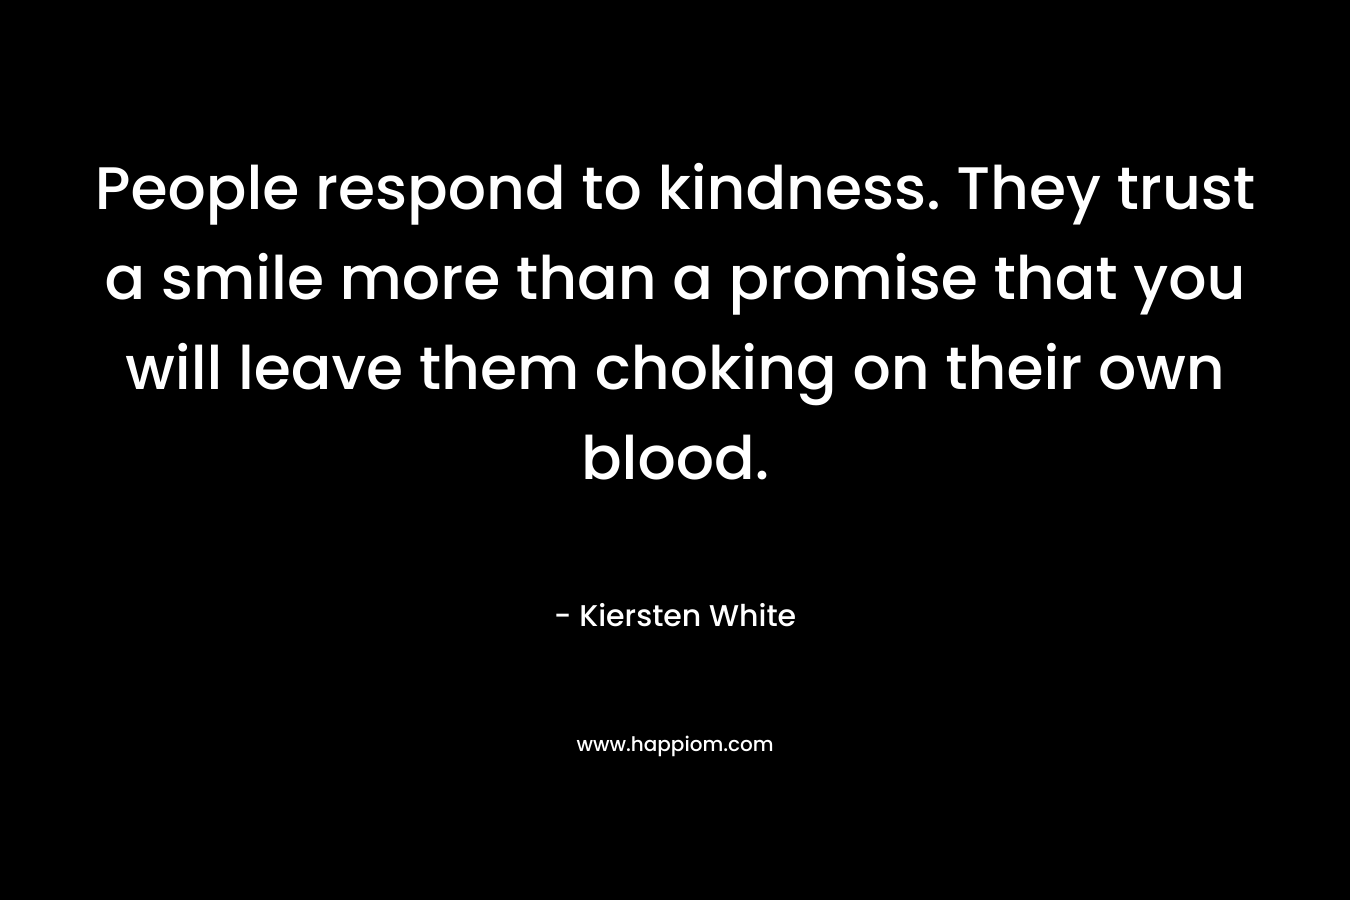 People respond to kindness. They trust a smile more than a promise that you will leave them choking on their own blood. – Kiersten White